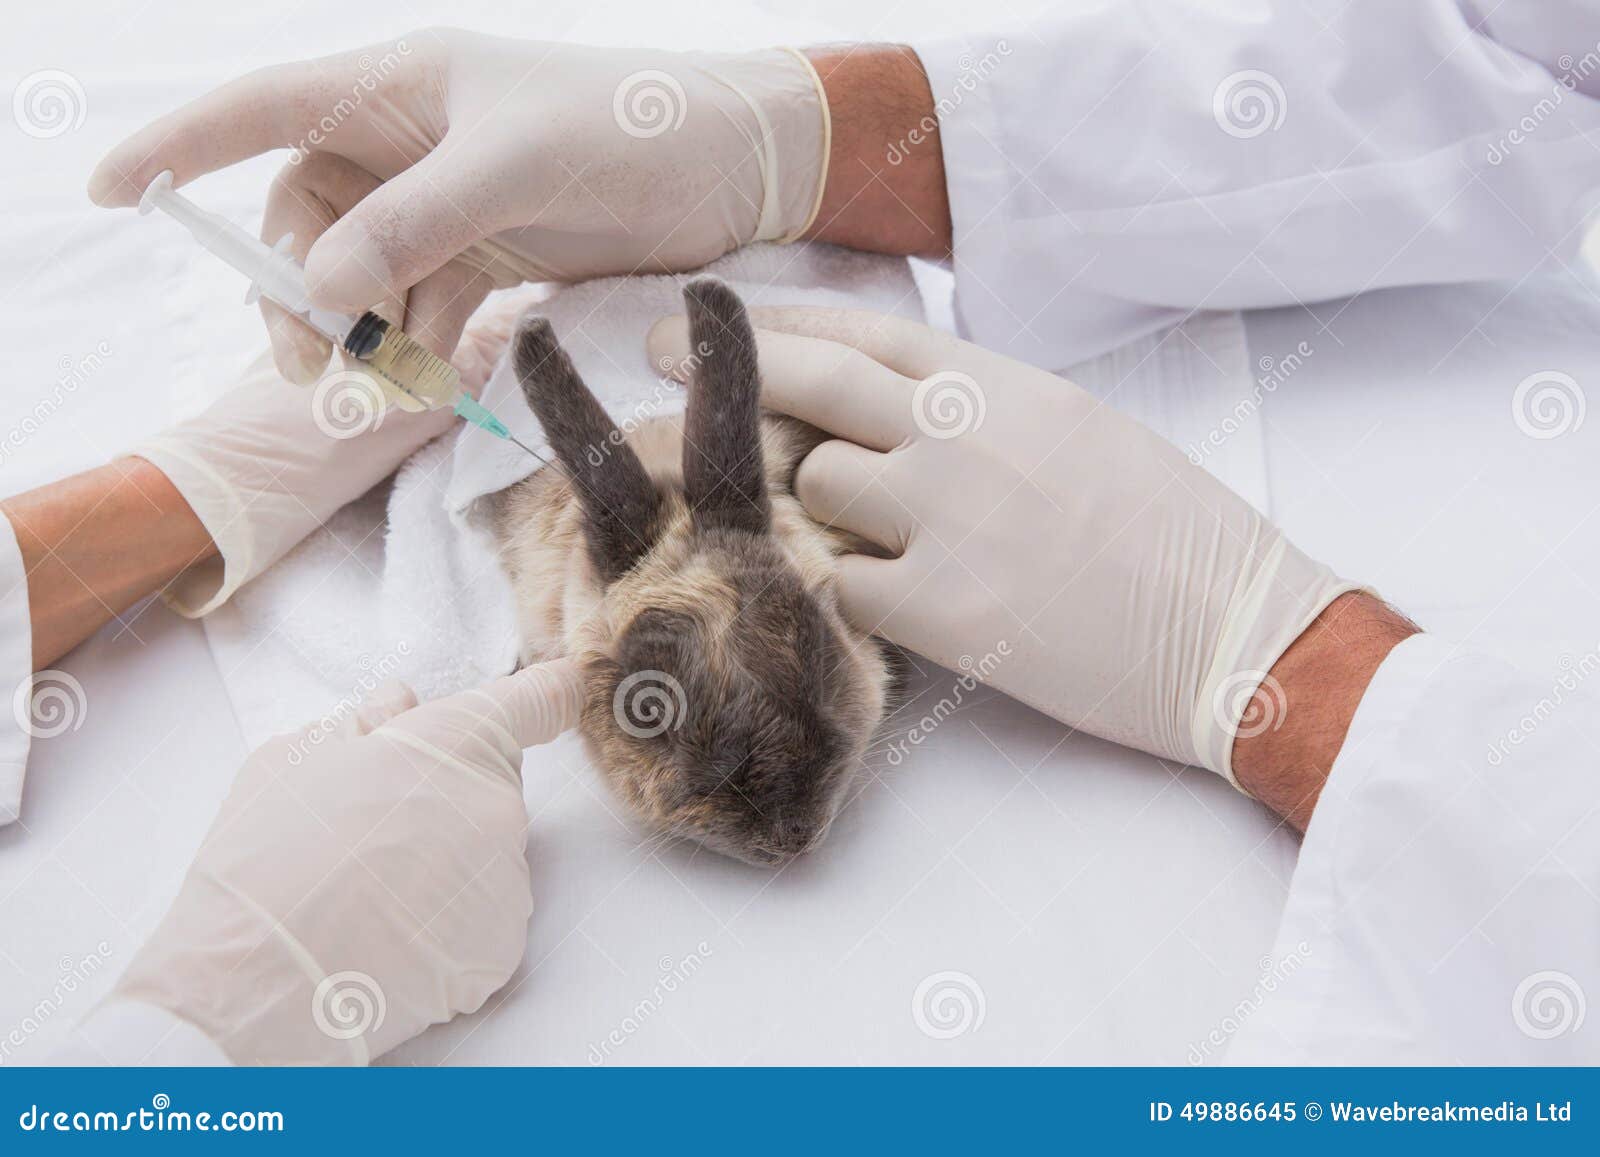 veterinarians doing injection at a rabbit